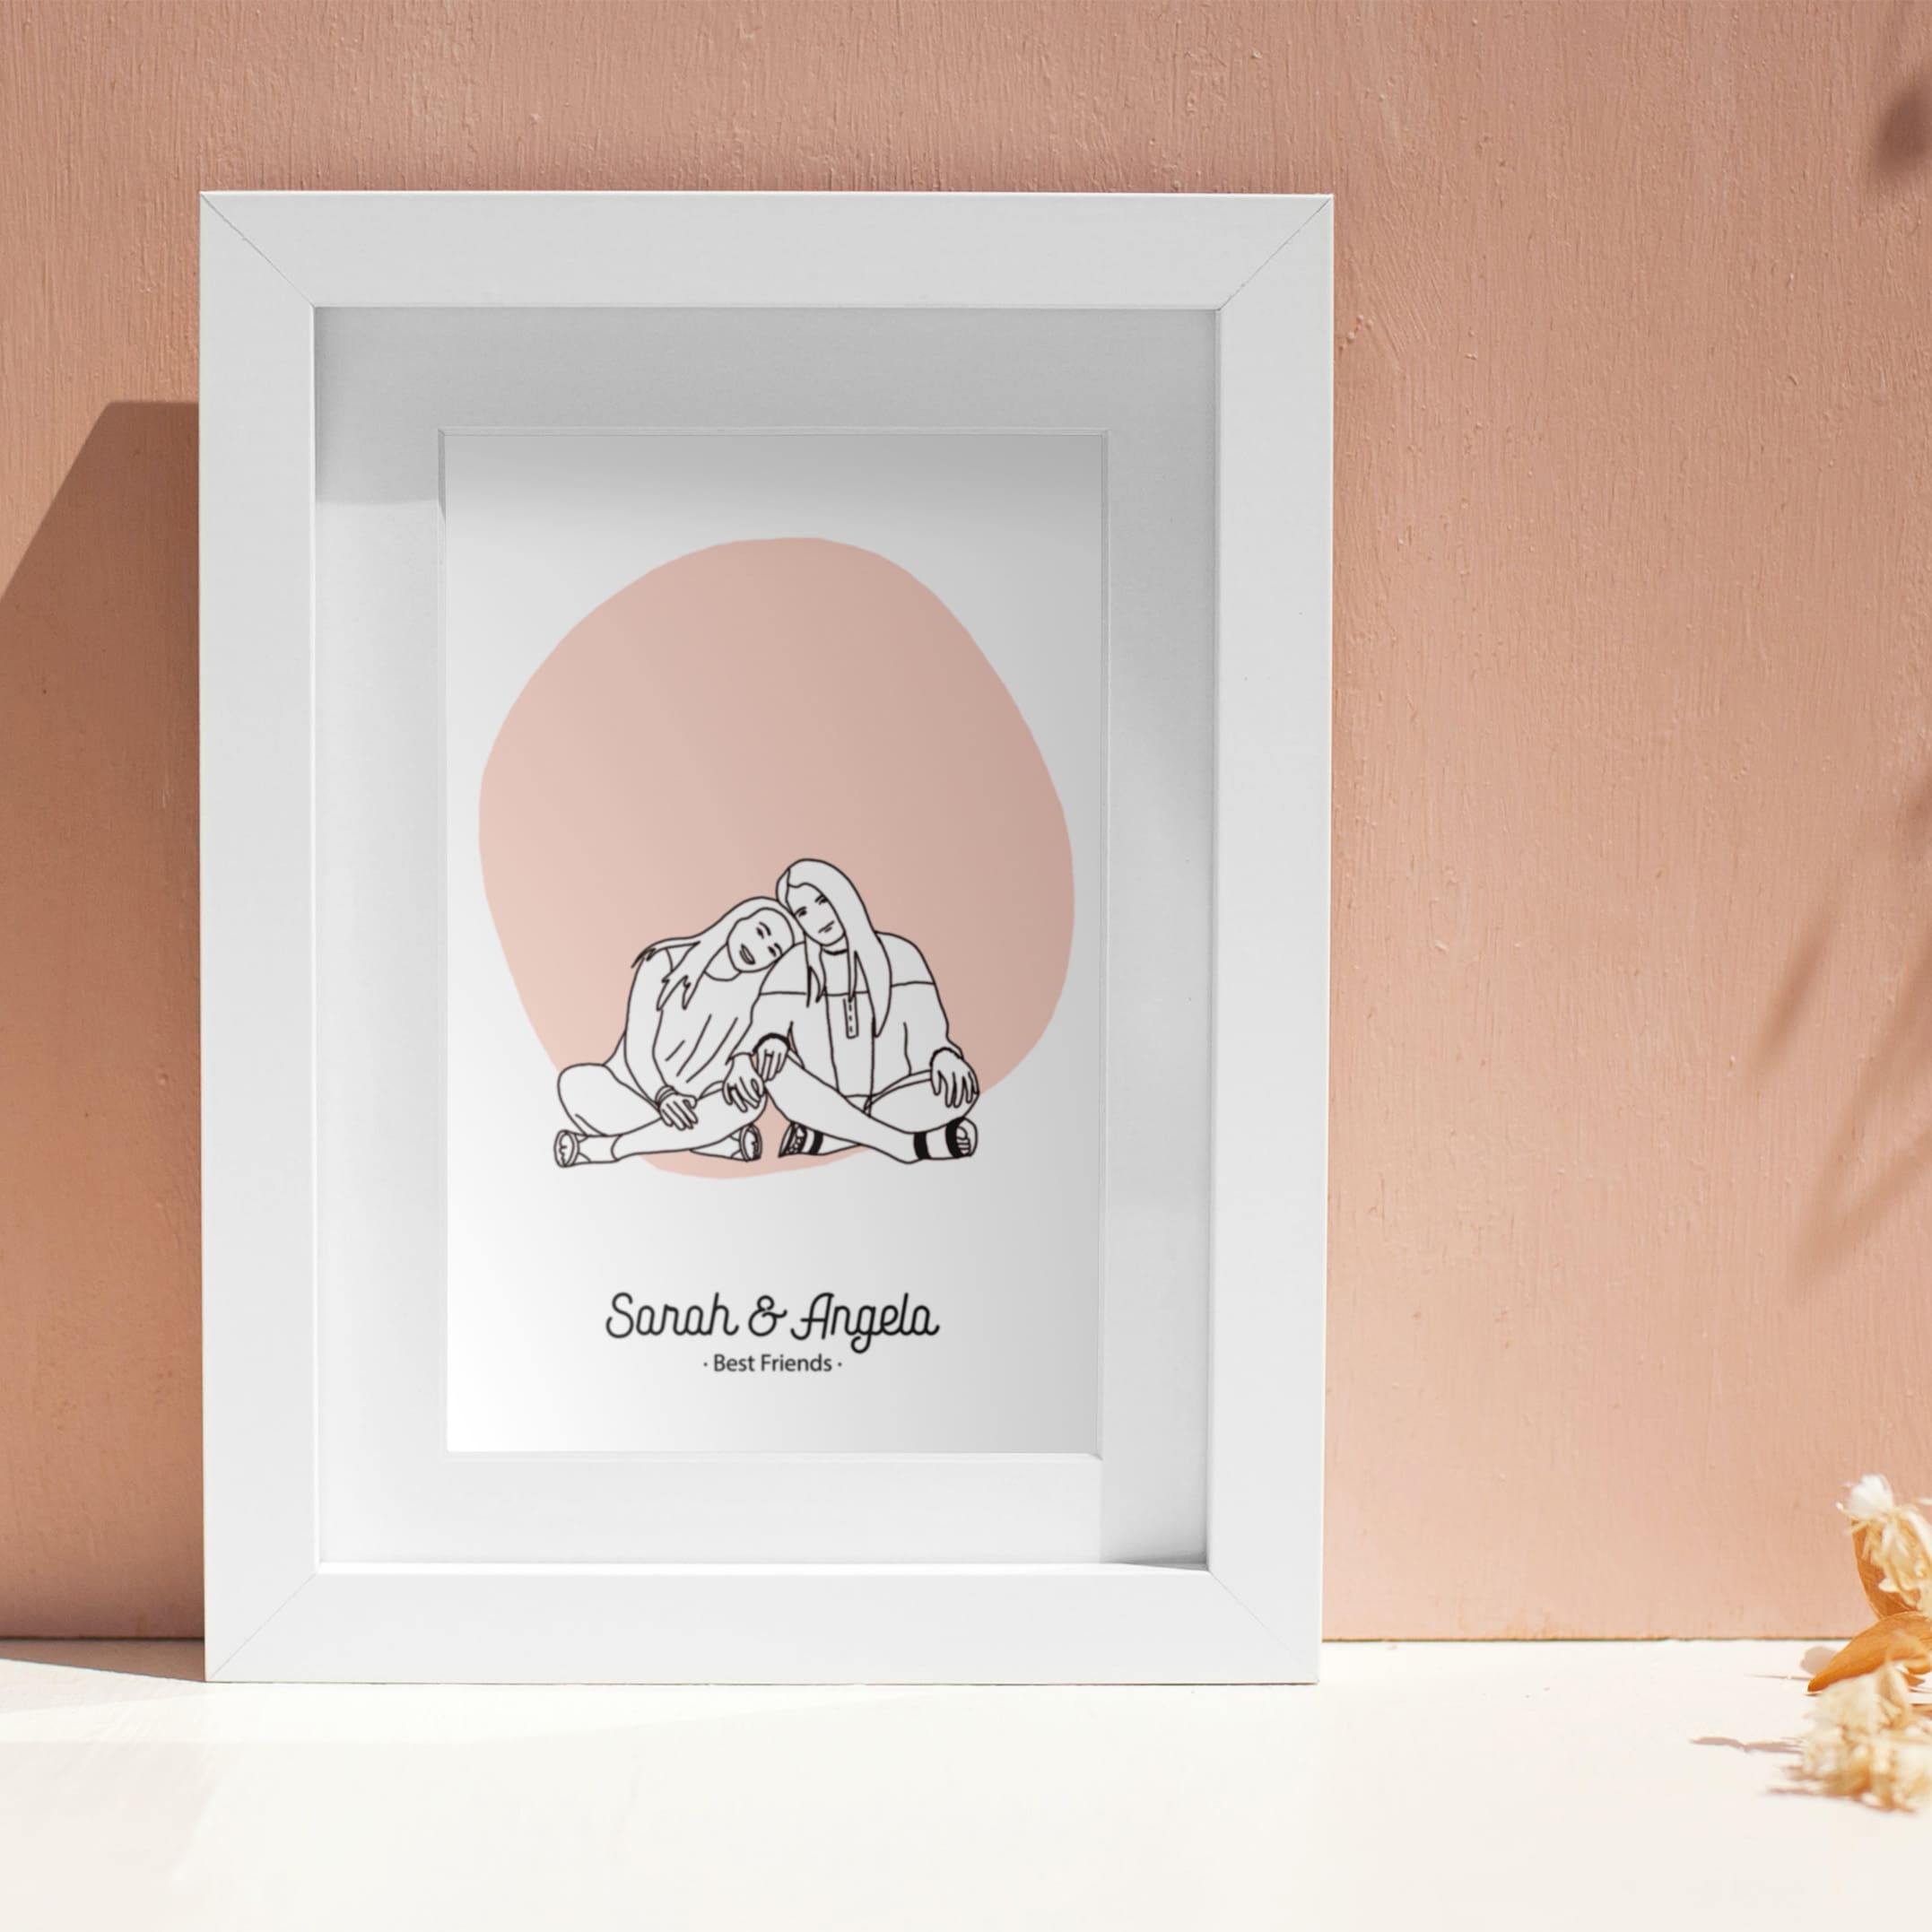 Best friends portrait illustration from photo in line art style as keep sake wall art with names date and quote